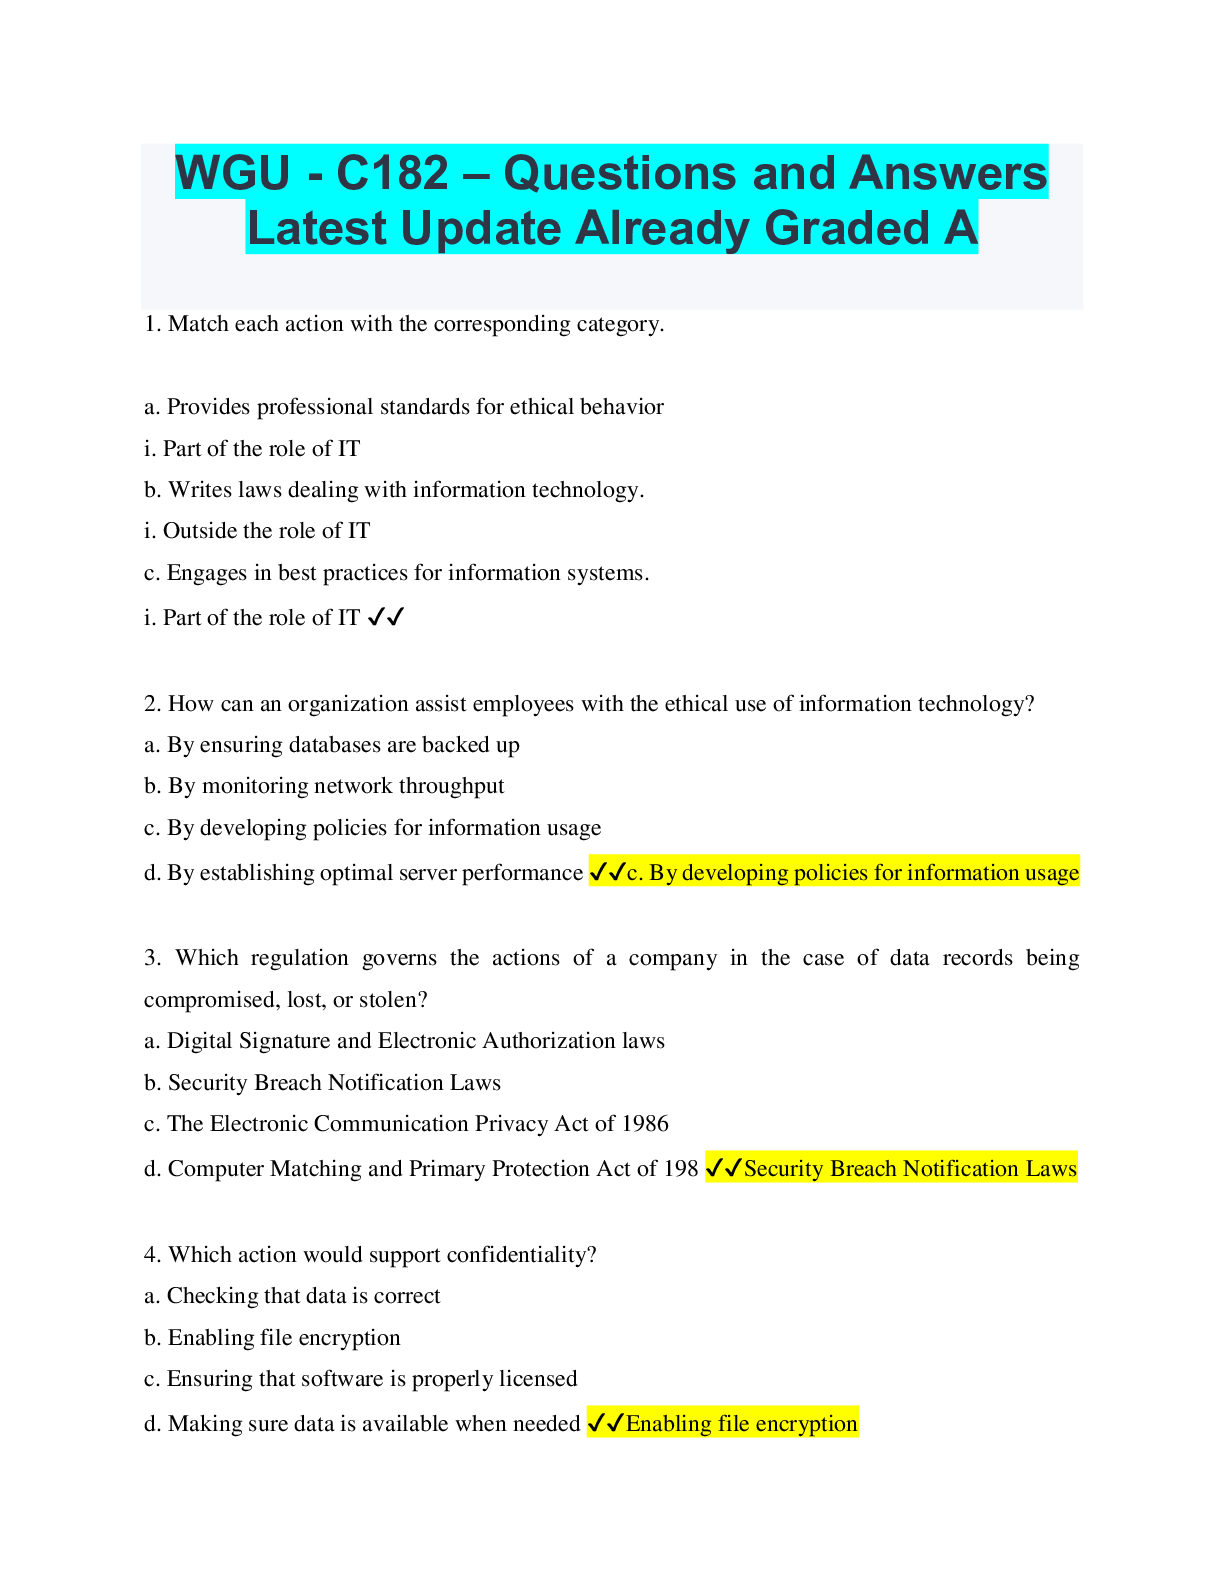 WGU C182 Questions and Answers Latest Update Already Graded A